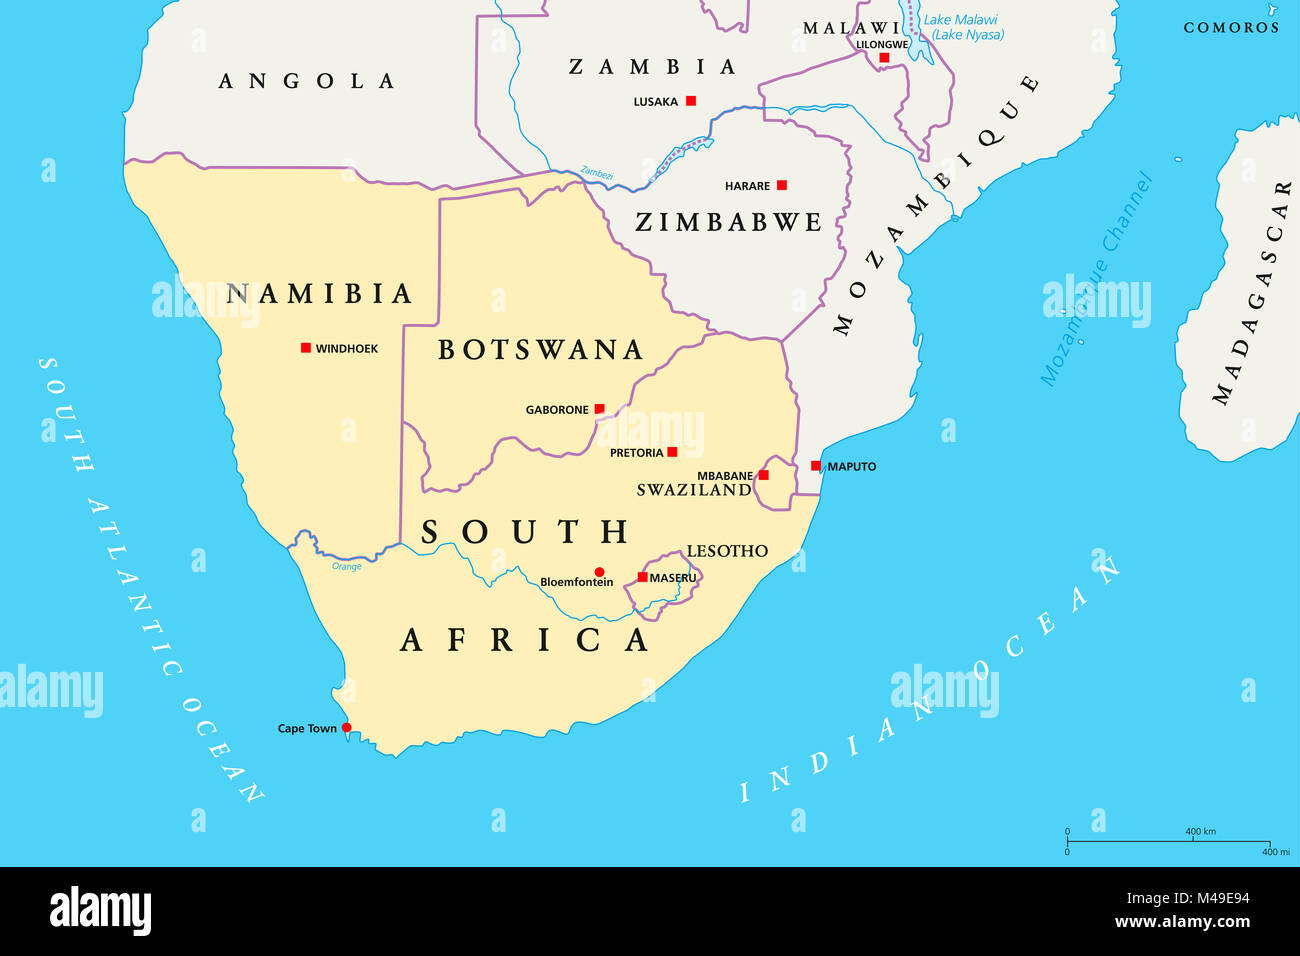 Southern Africa region political map. Southernmost region of African continent. South Africa, Namibia, Botswana, Swaziland and Lesotho. Stock Photo